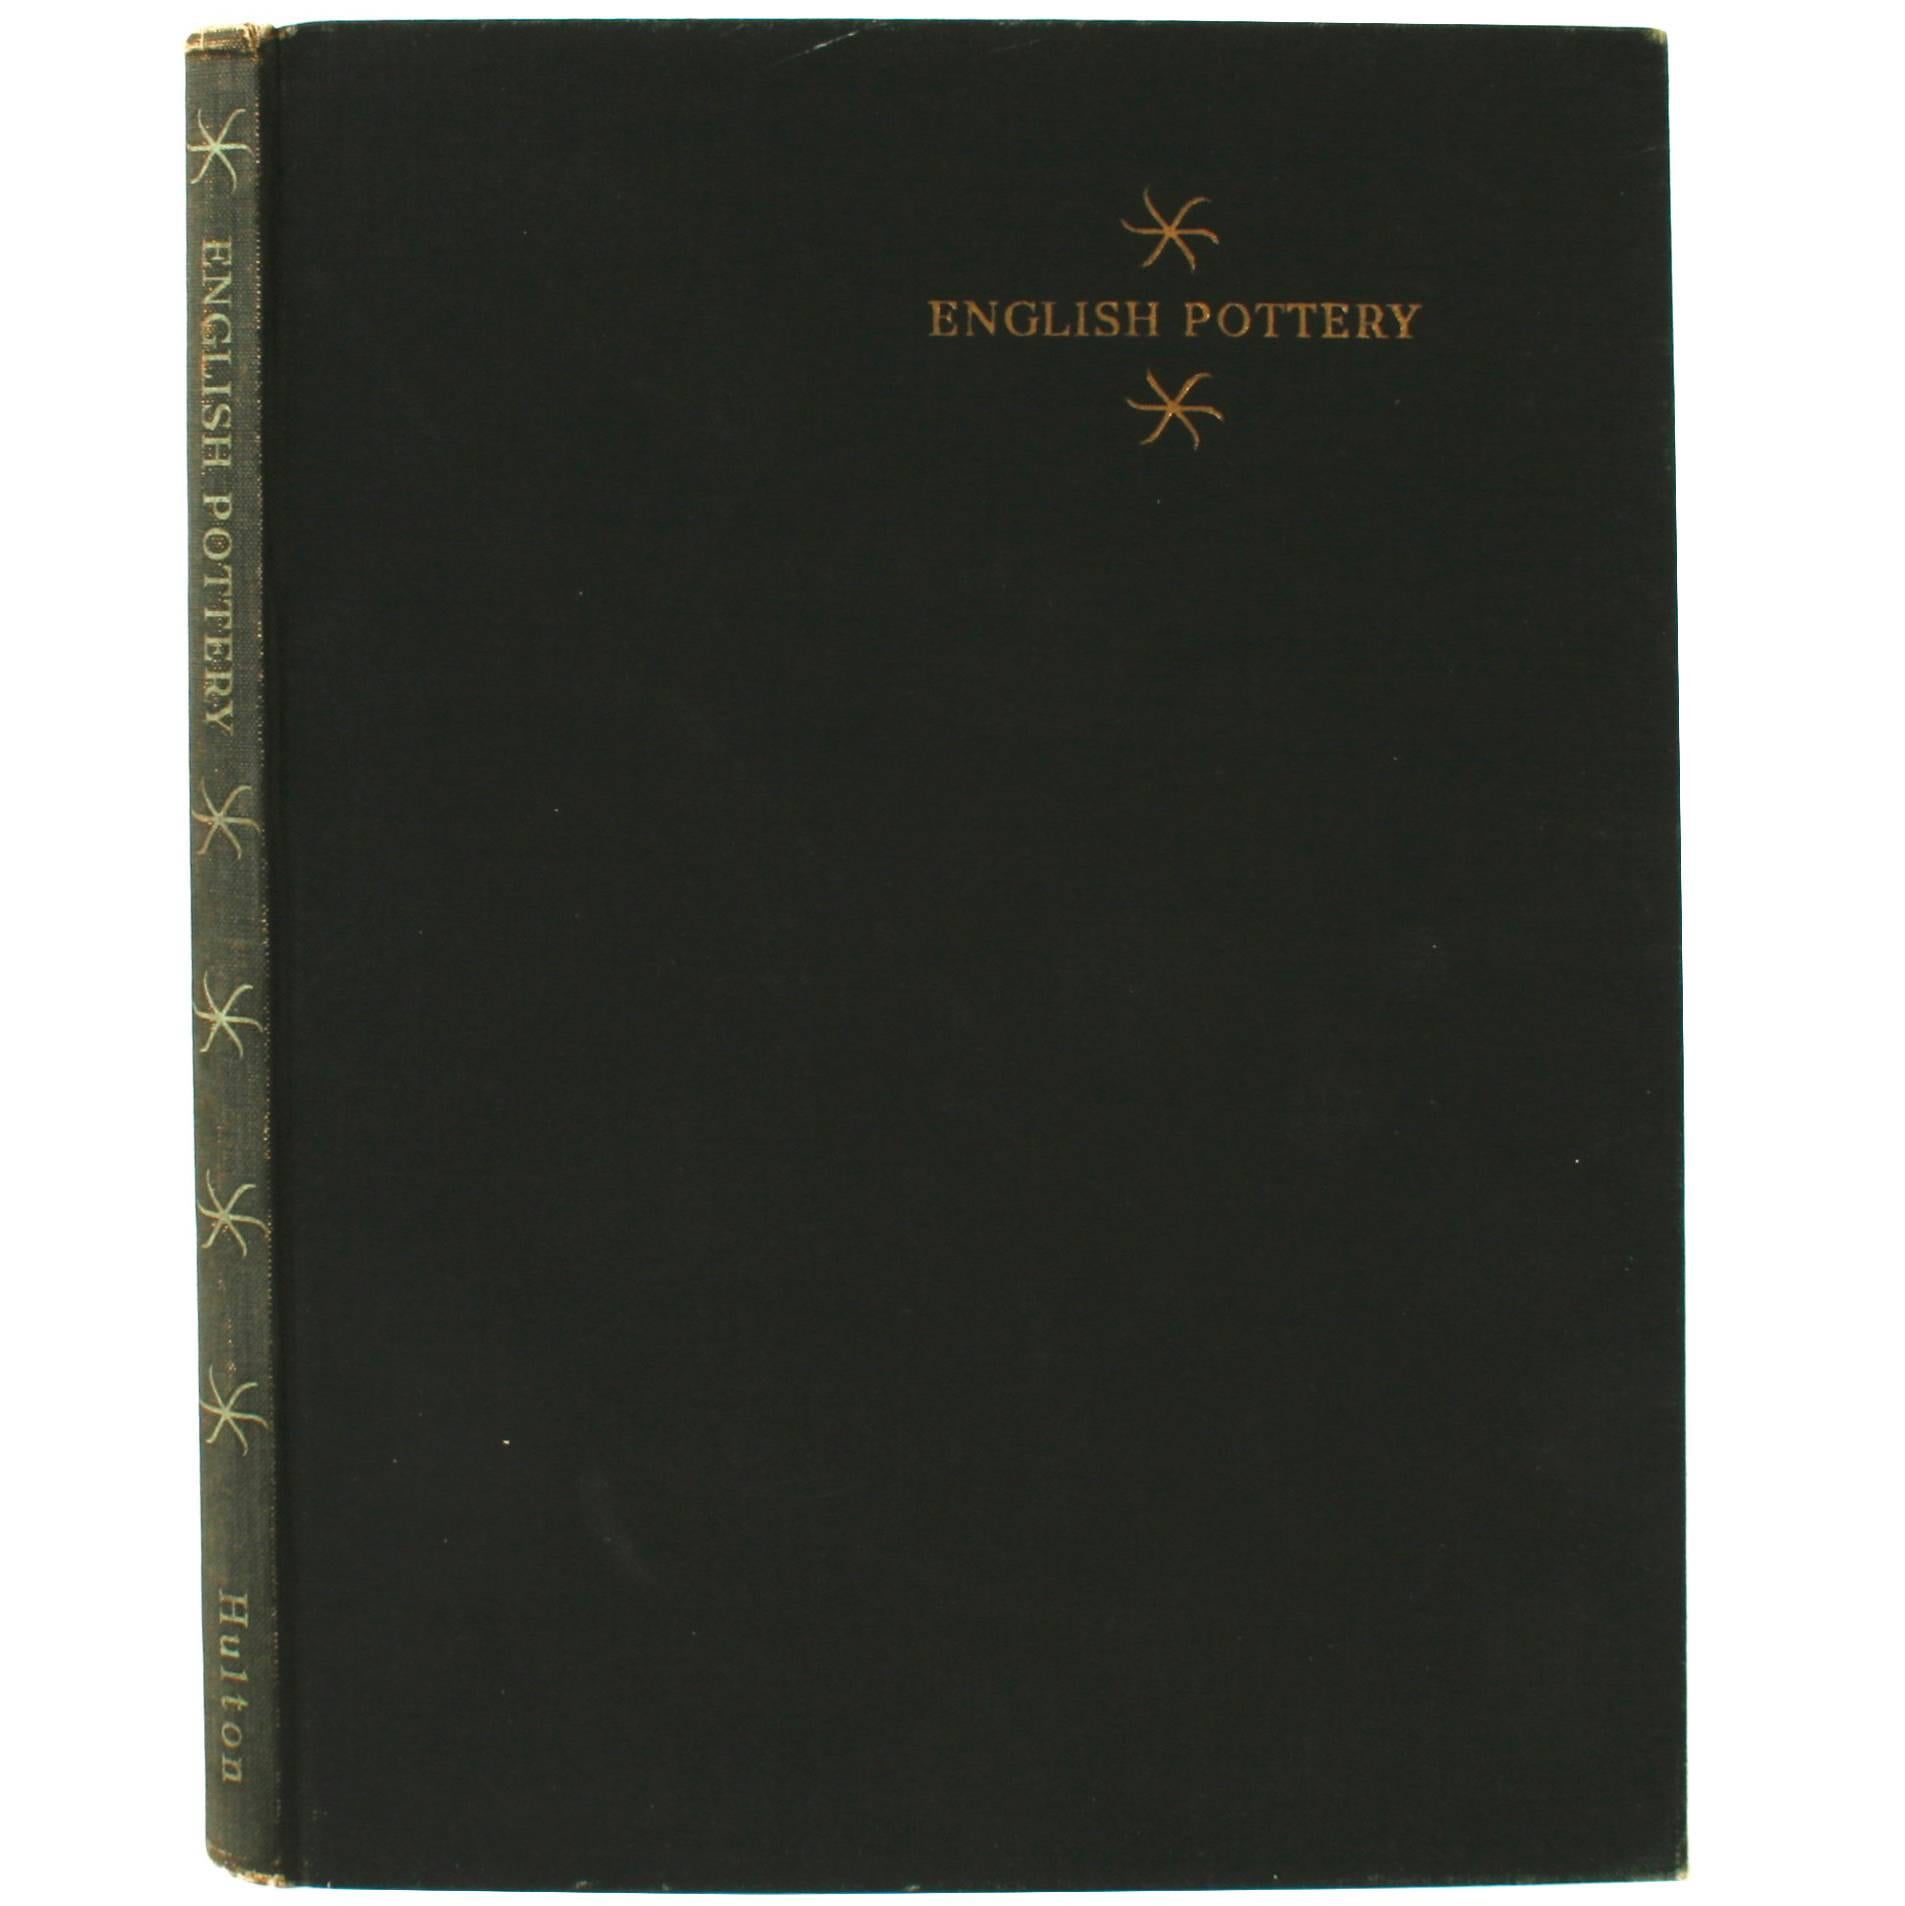 English Pottery by Griselda Lewis, First Edition